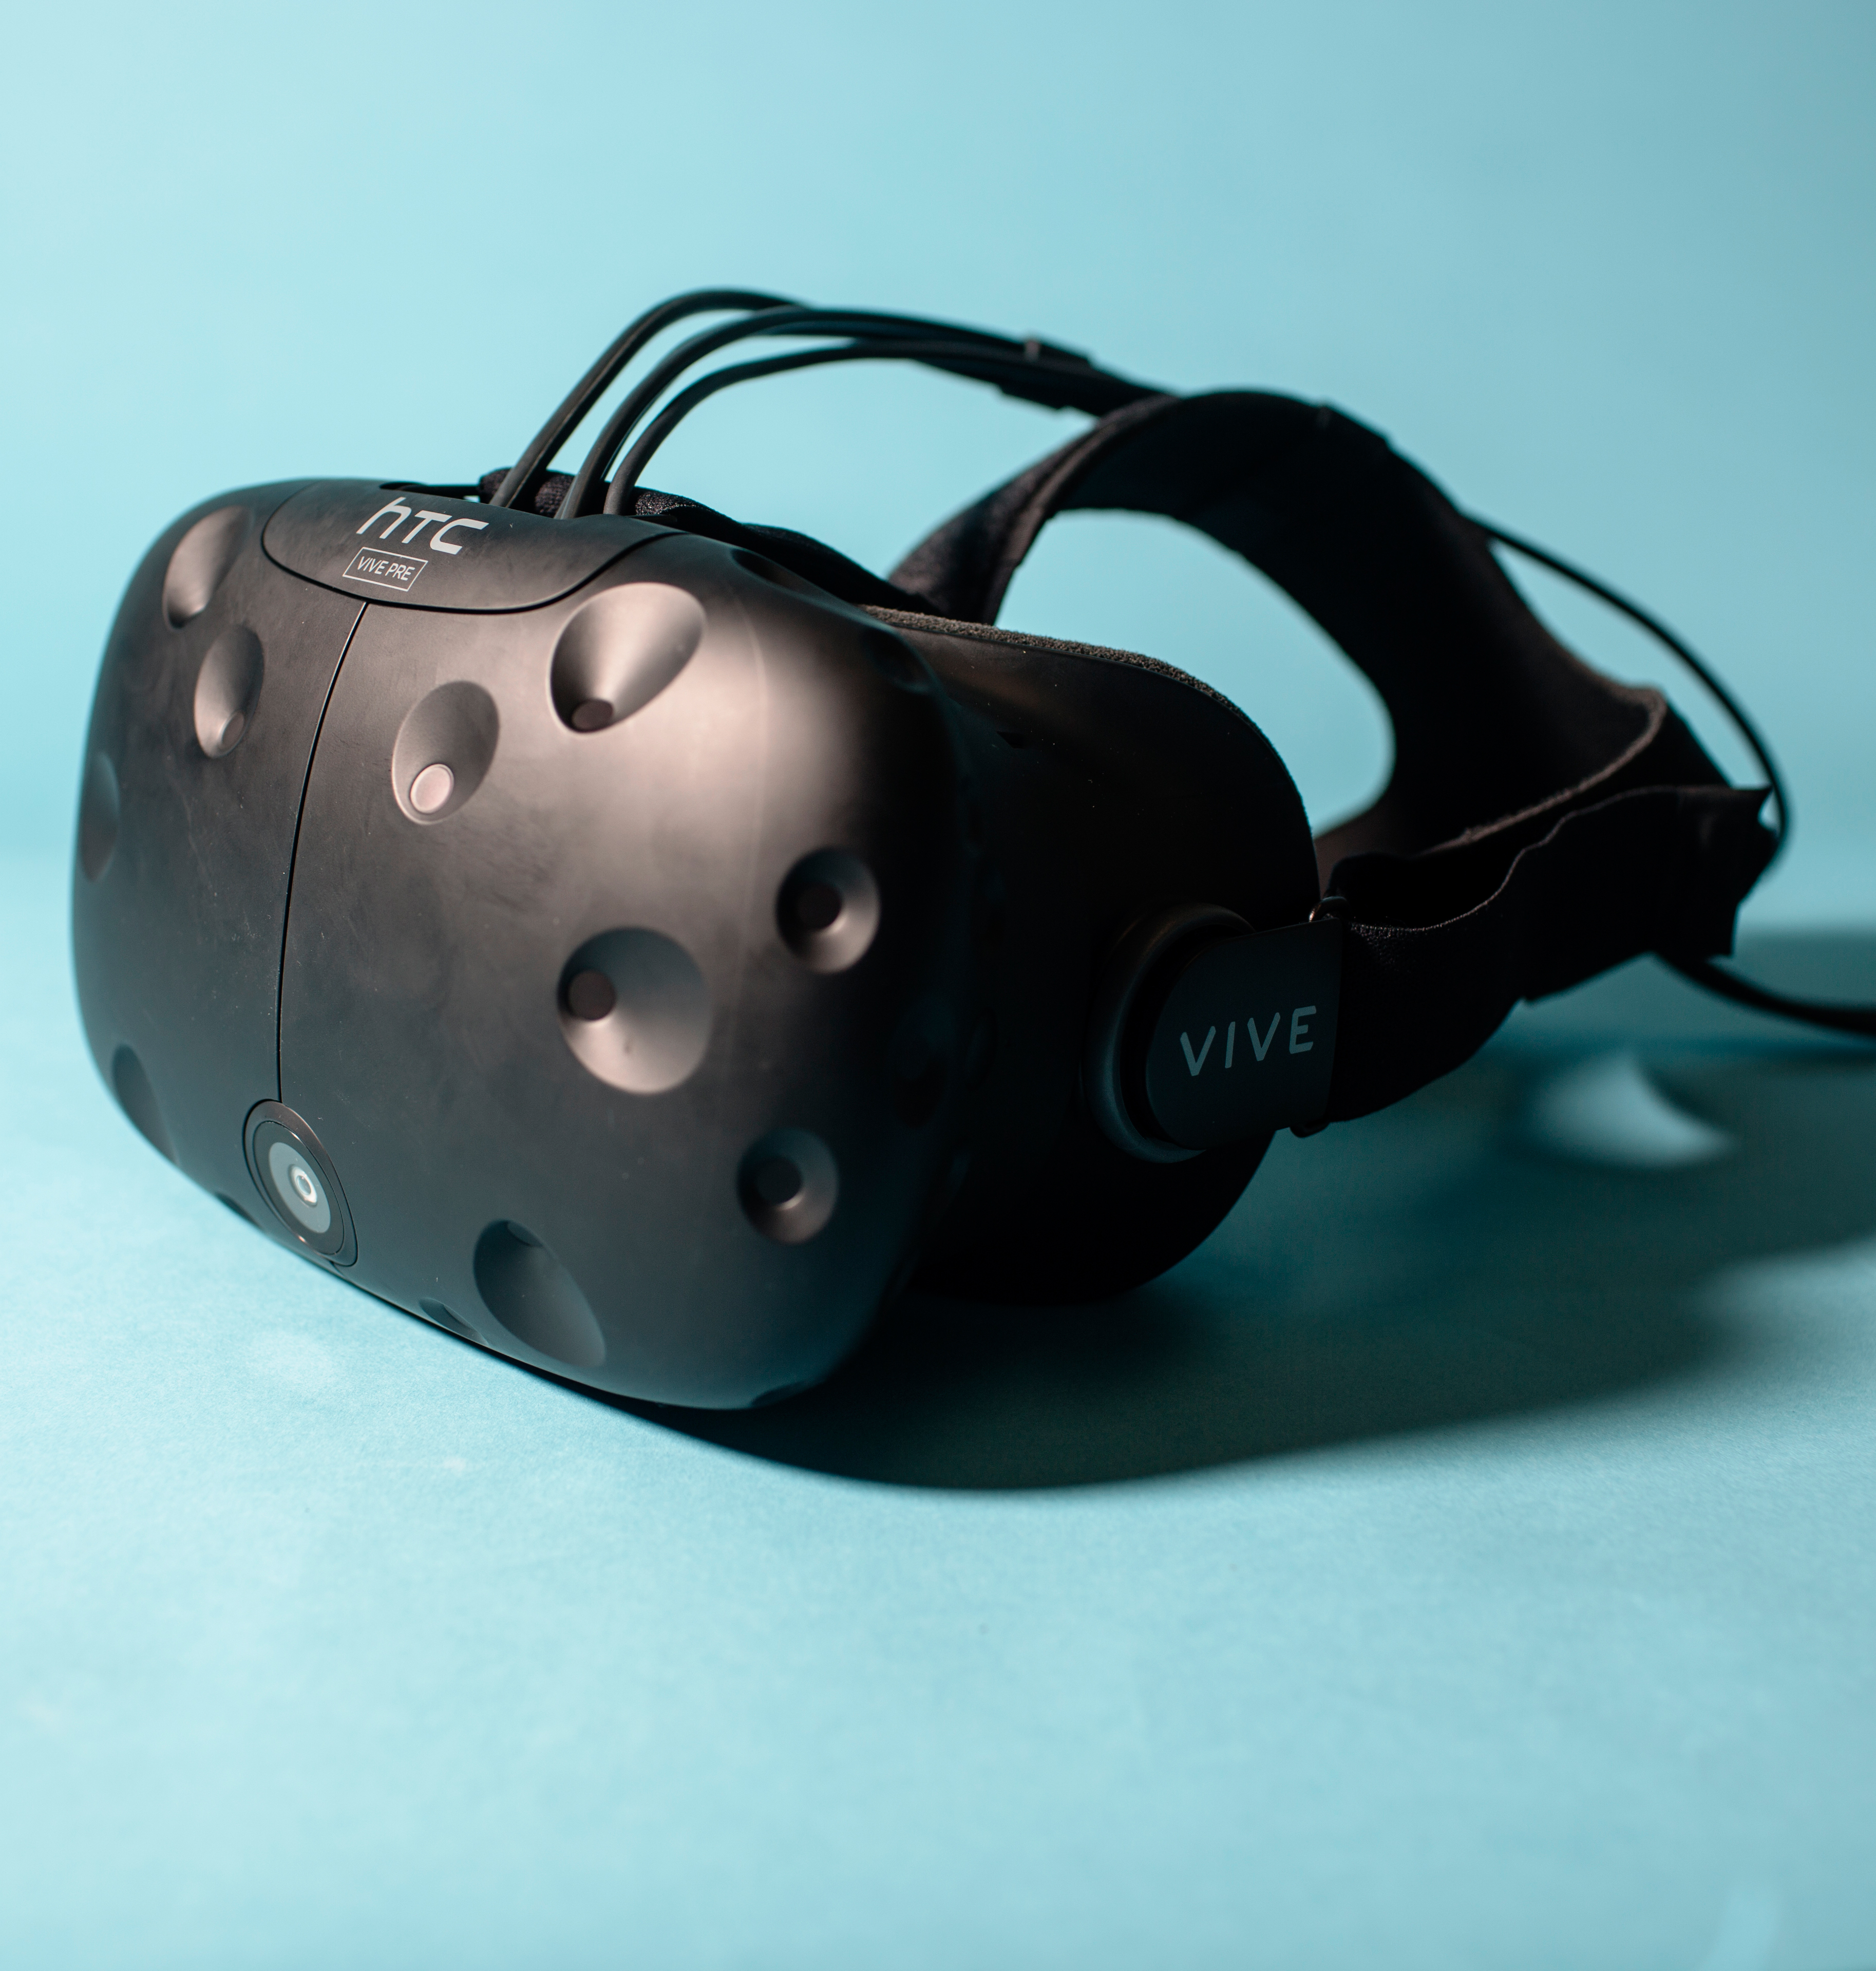 HTC Vive (Tyler Essary for TIME)